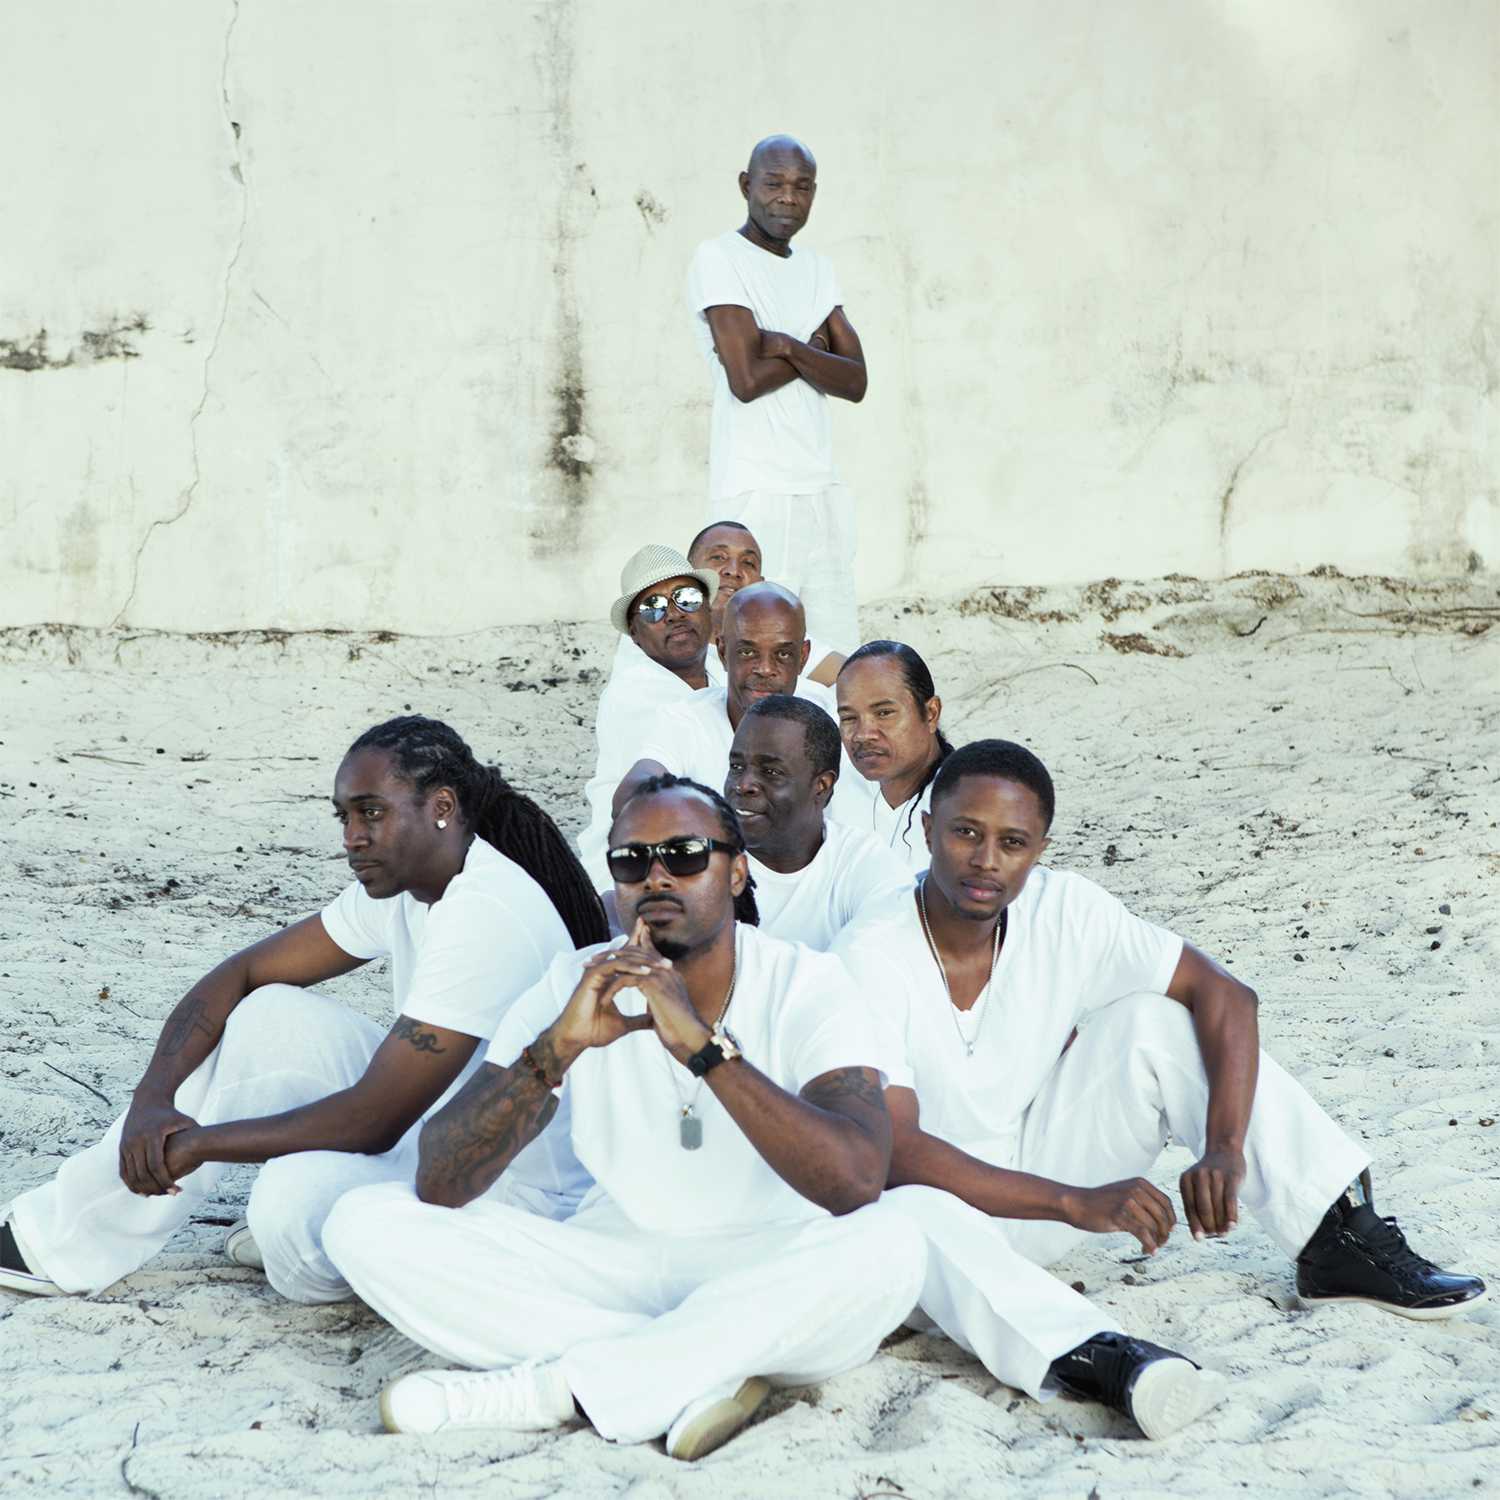 Who? Who? Who? A Conversation with the Baha Men The Mac Weekly